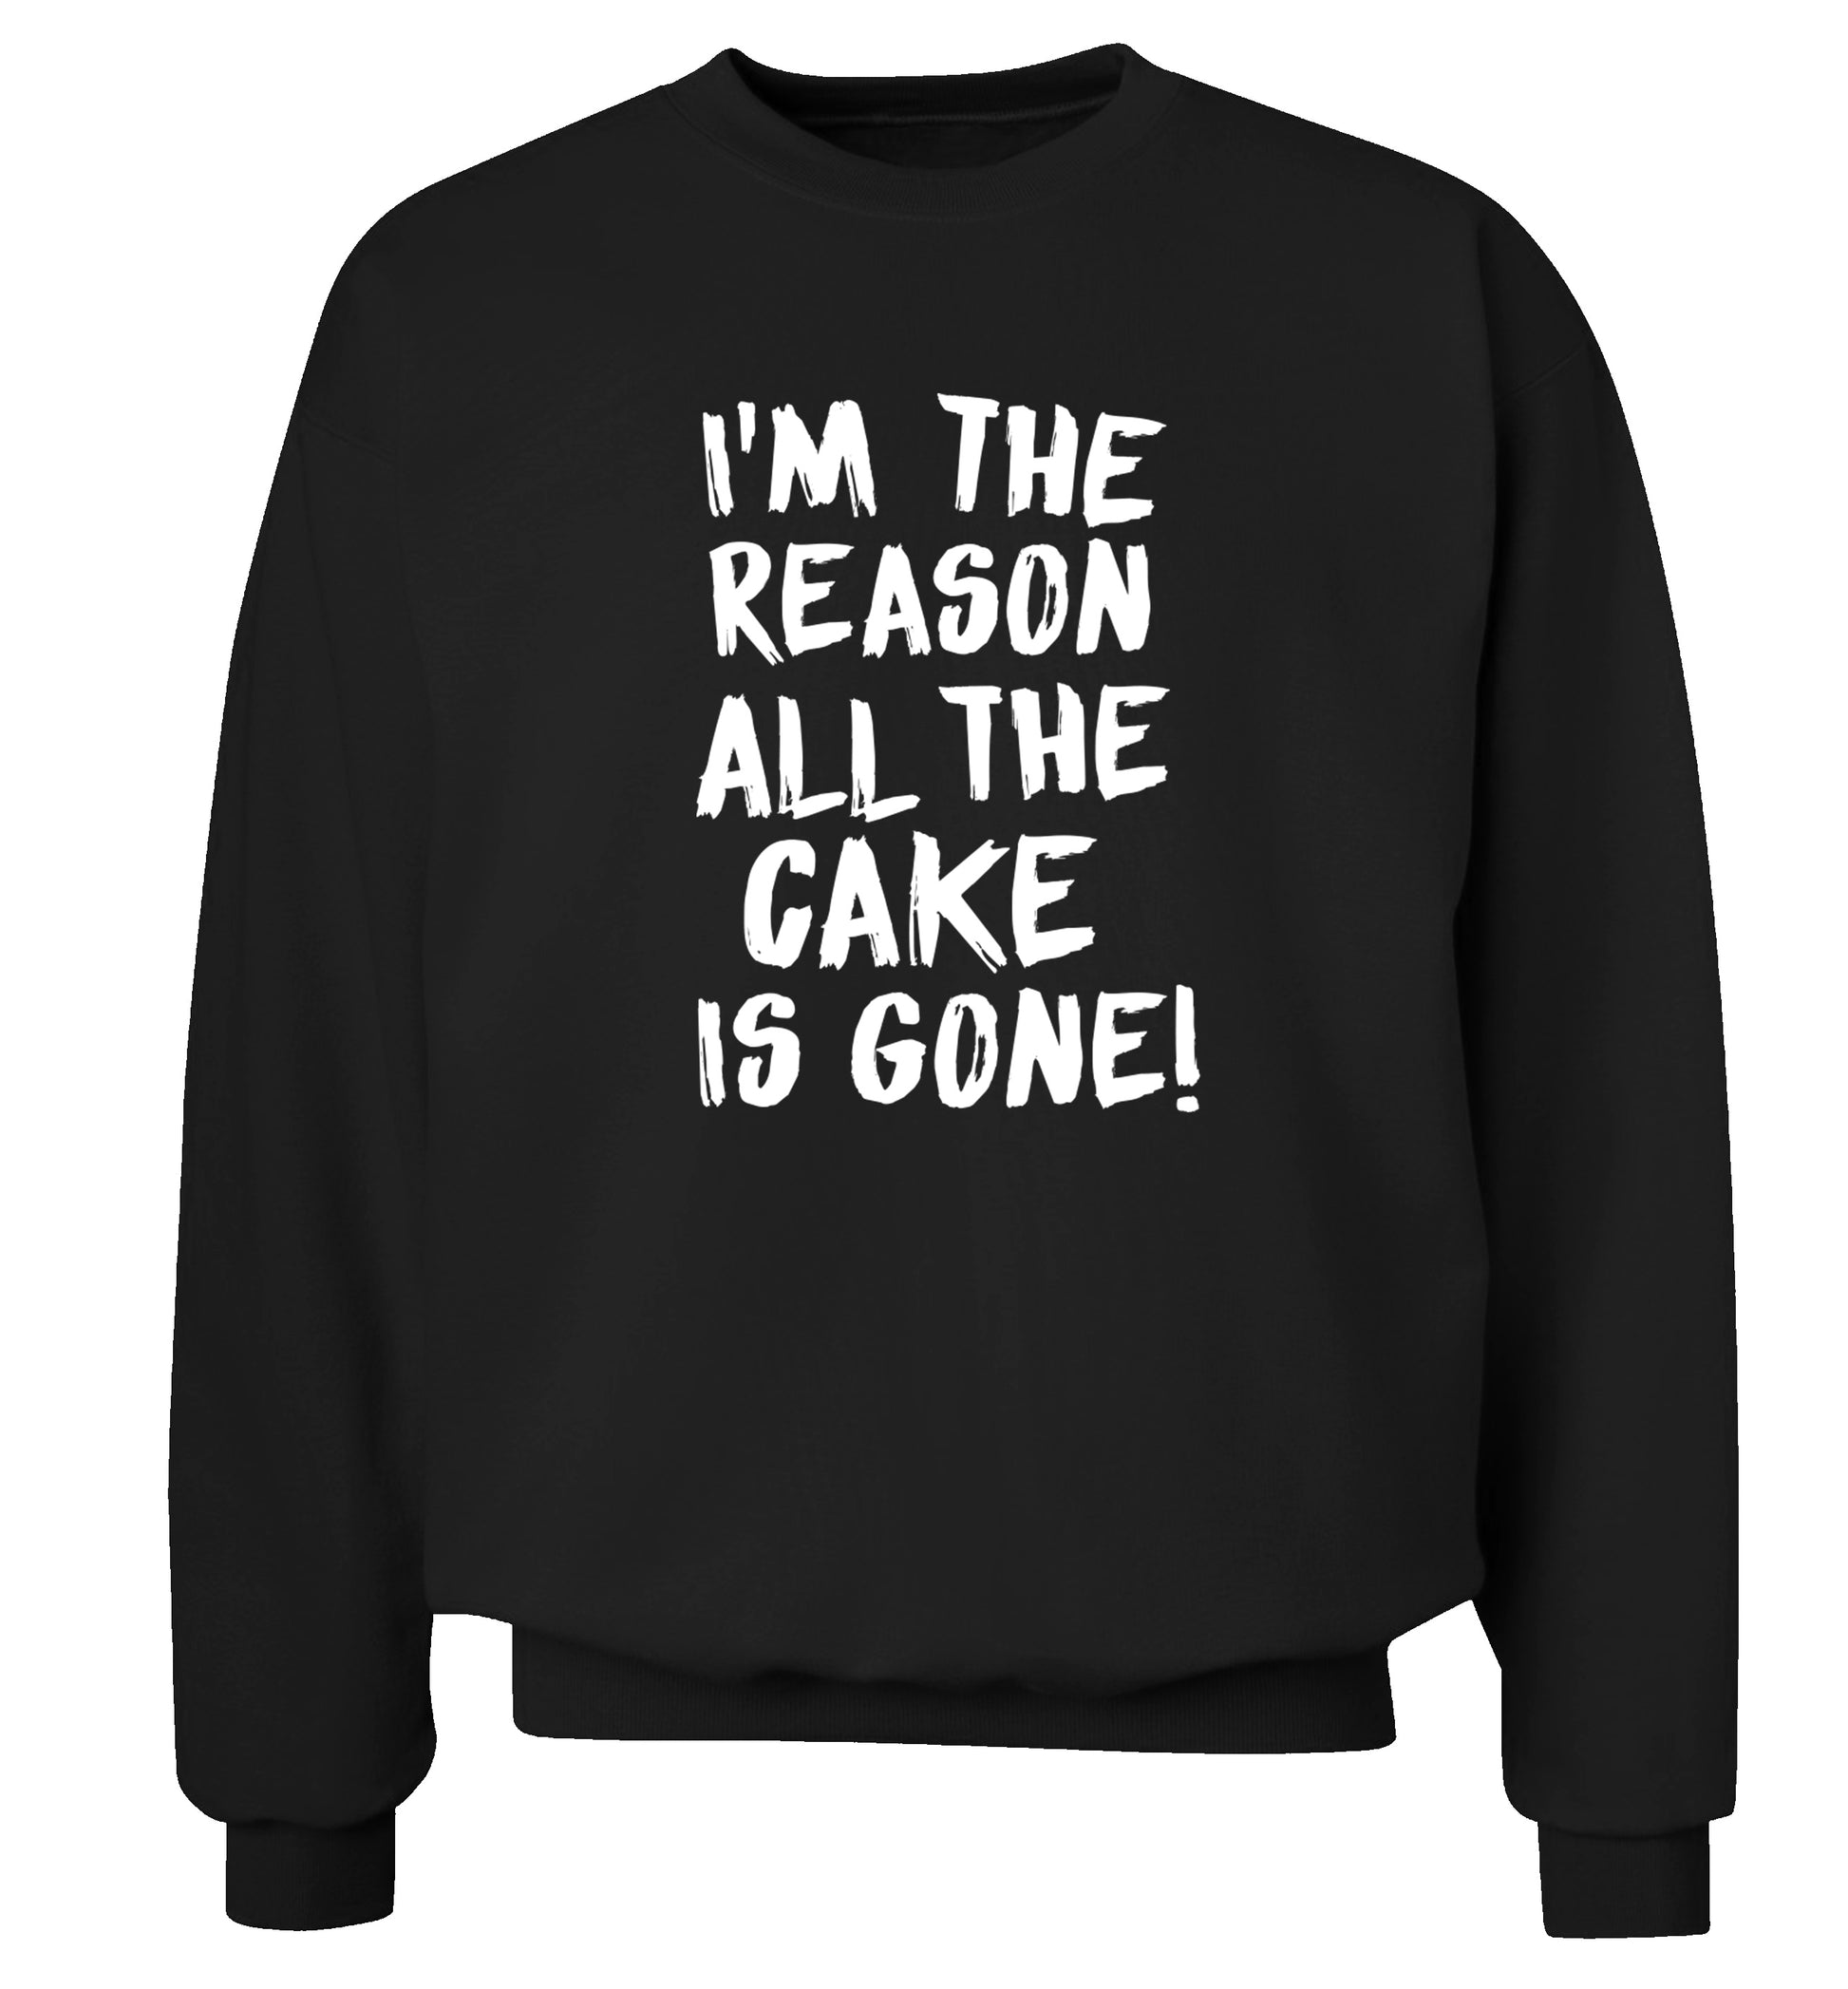 I'm the reason all the cake is gone Adult's unisex black Sweater 2XL